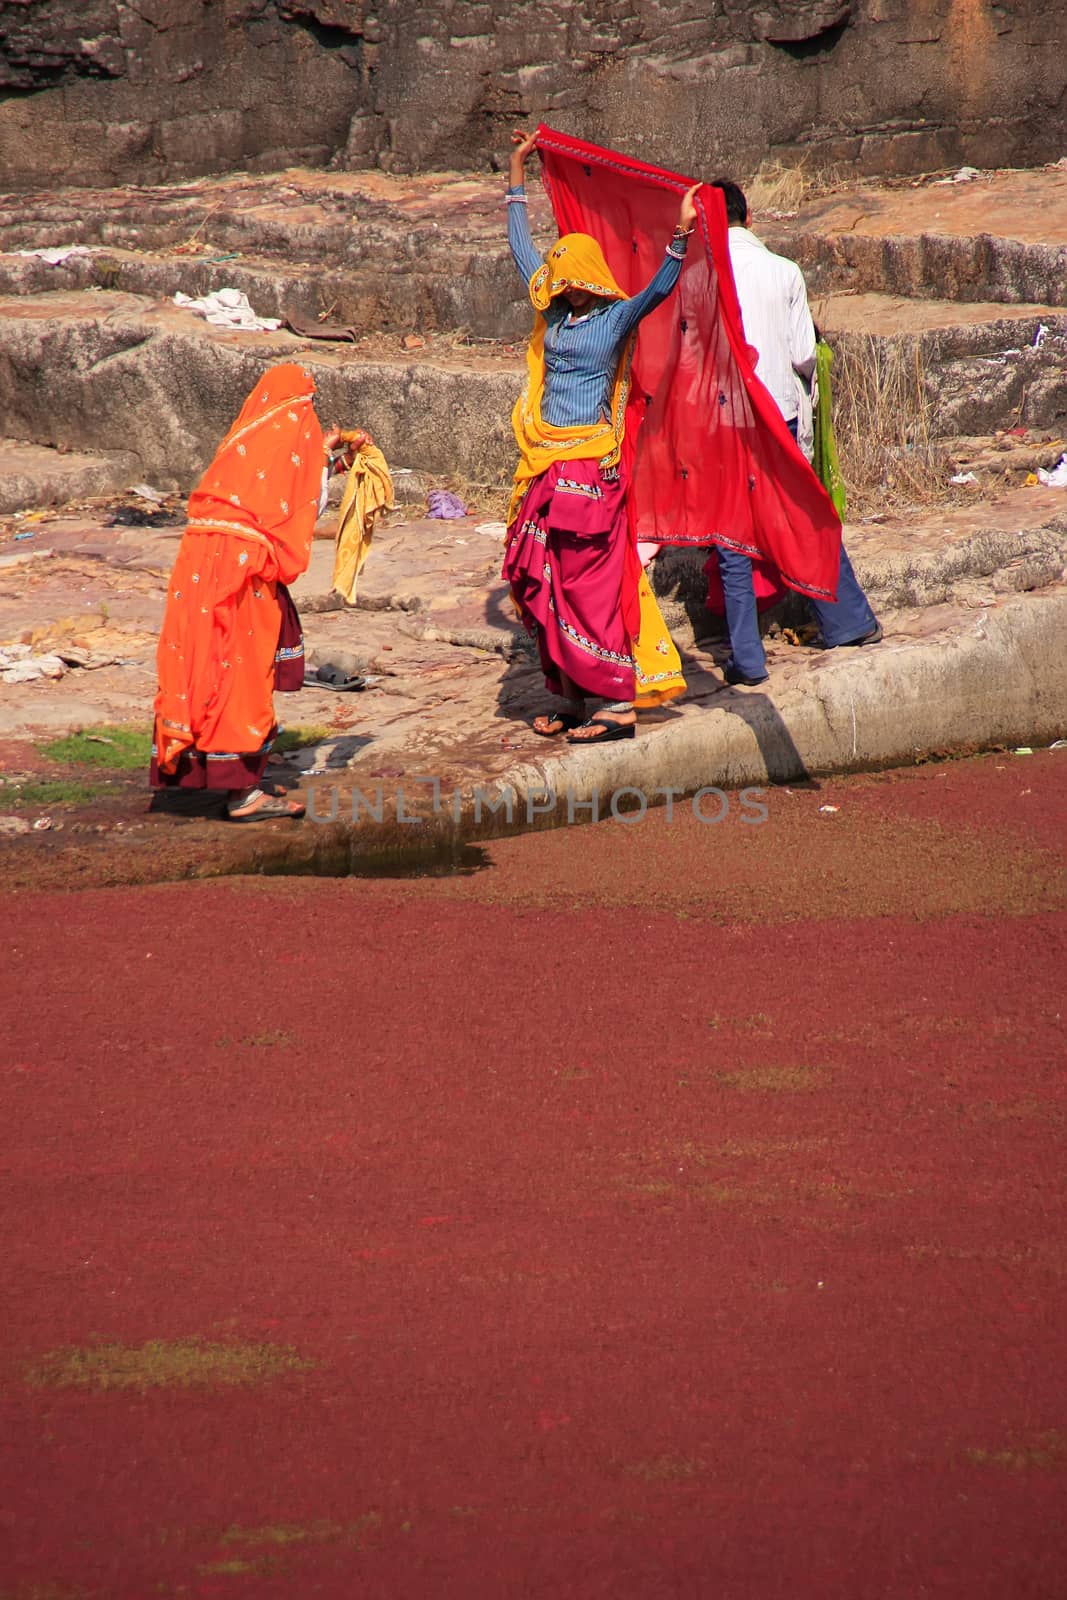 Indian women in colorful saris standing at the edge of red pond, Ranthambore Fort, Rajasthan, India